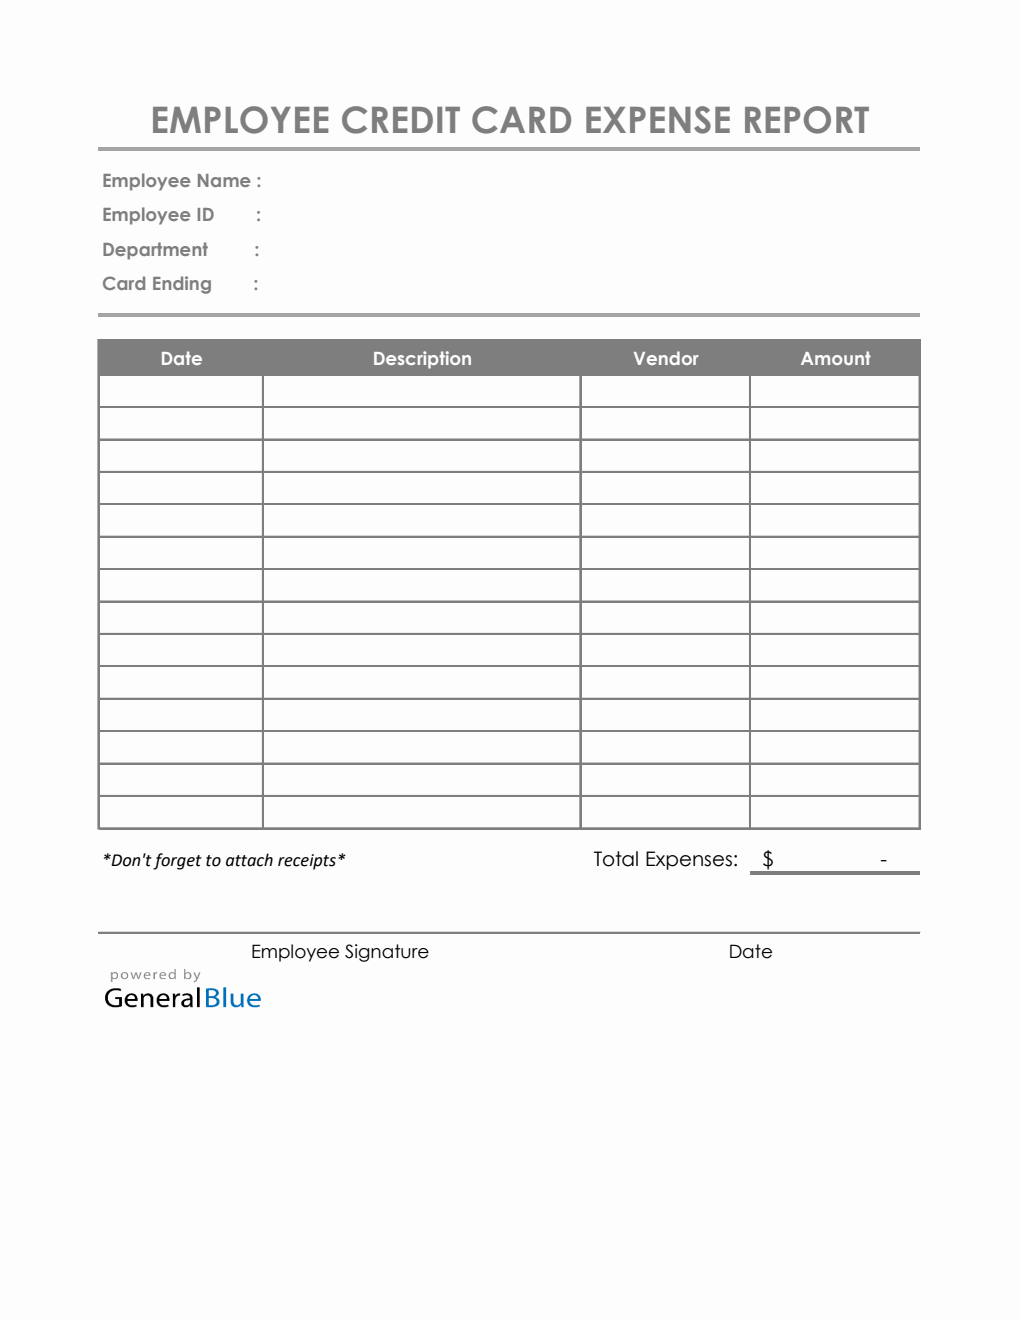 Employee Credit Card Expense Report Template in Excel